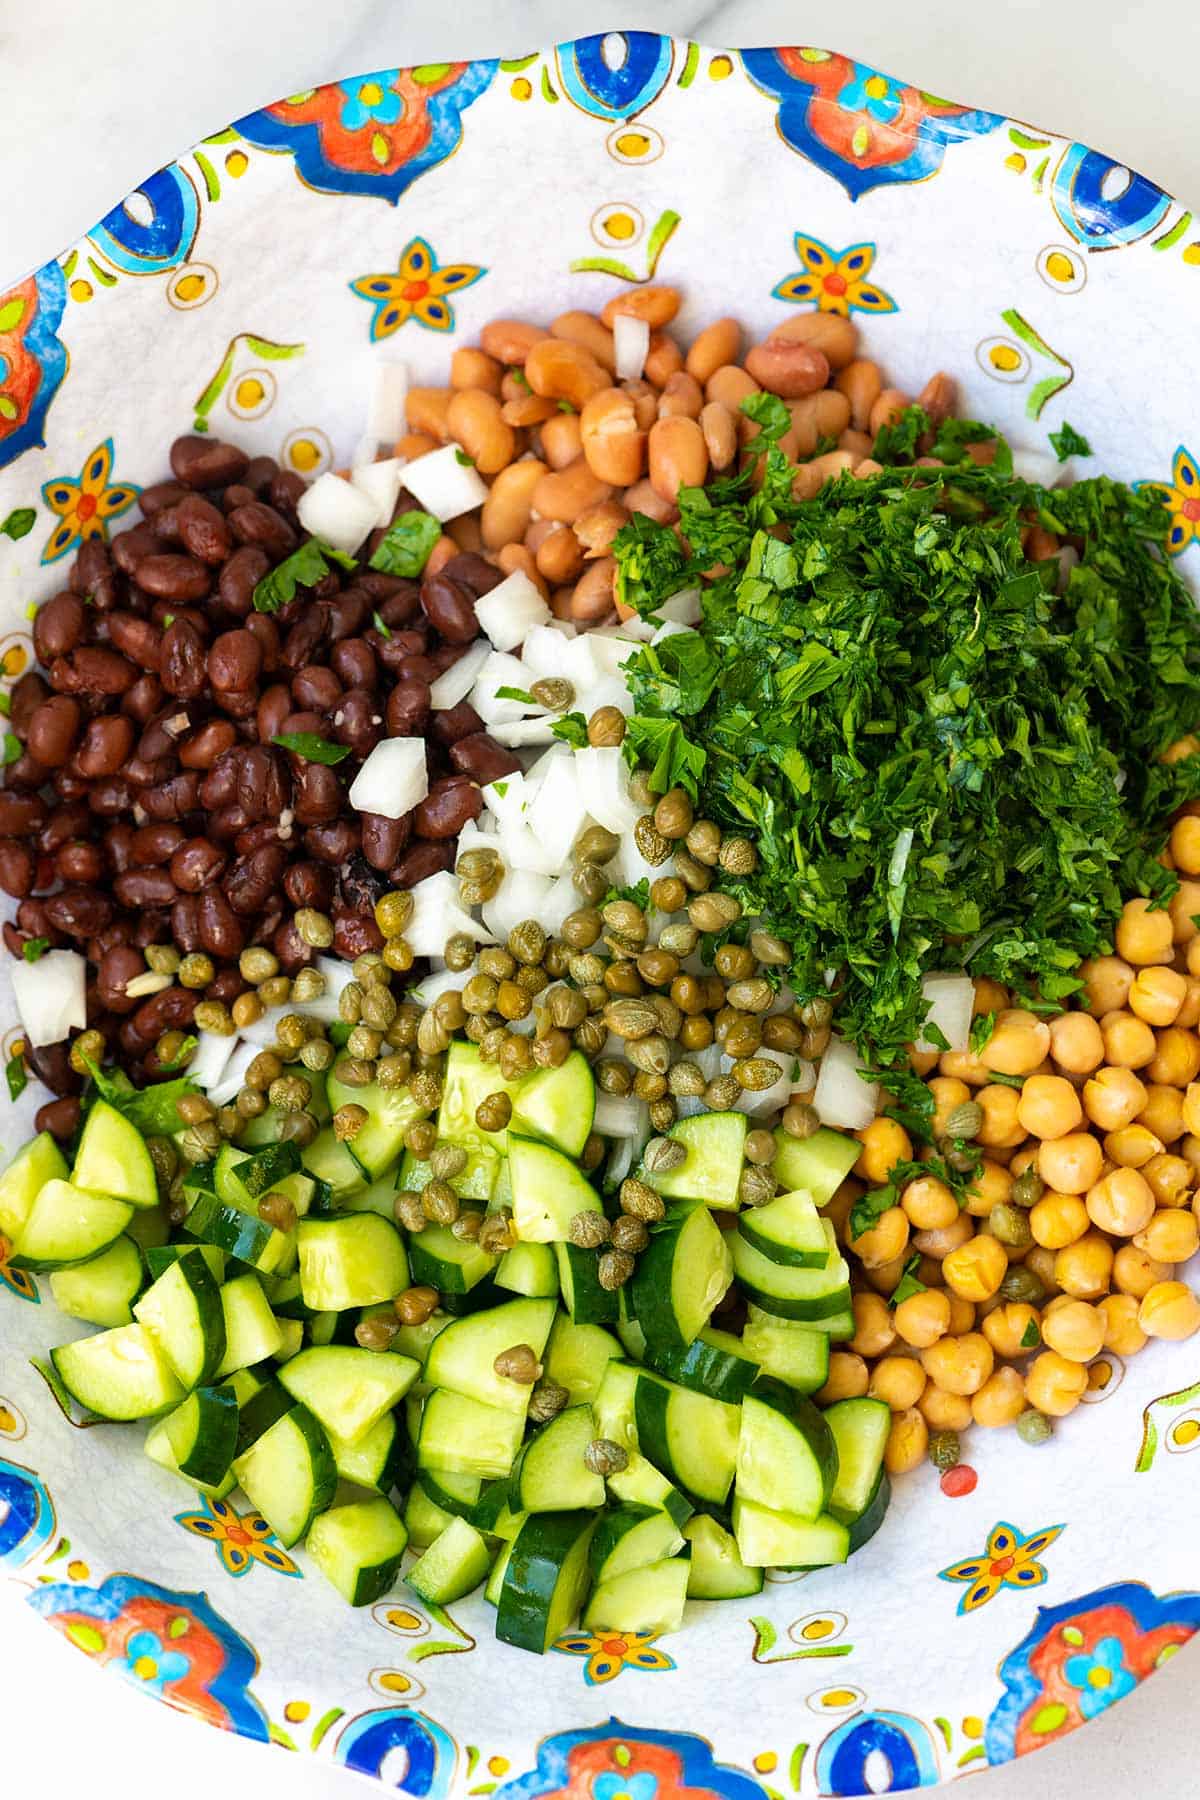 Ingredients for bean salad (beans, onion, cucumbers and parsley)